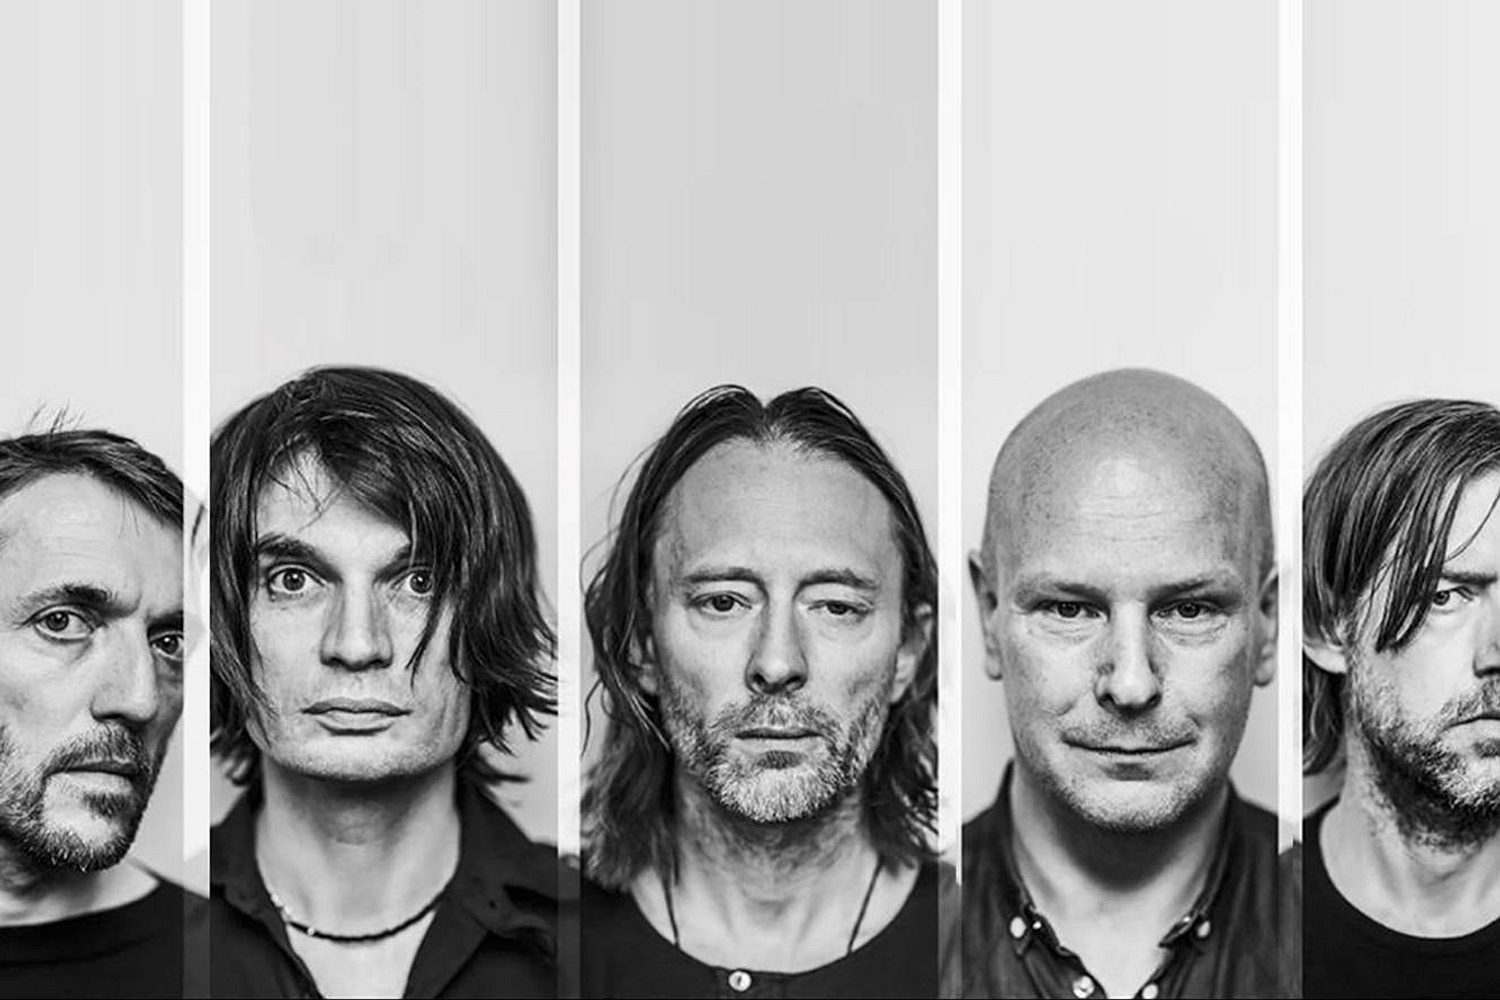 Radiohead confirm ‘KID A MNESIA’ collection